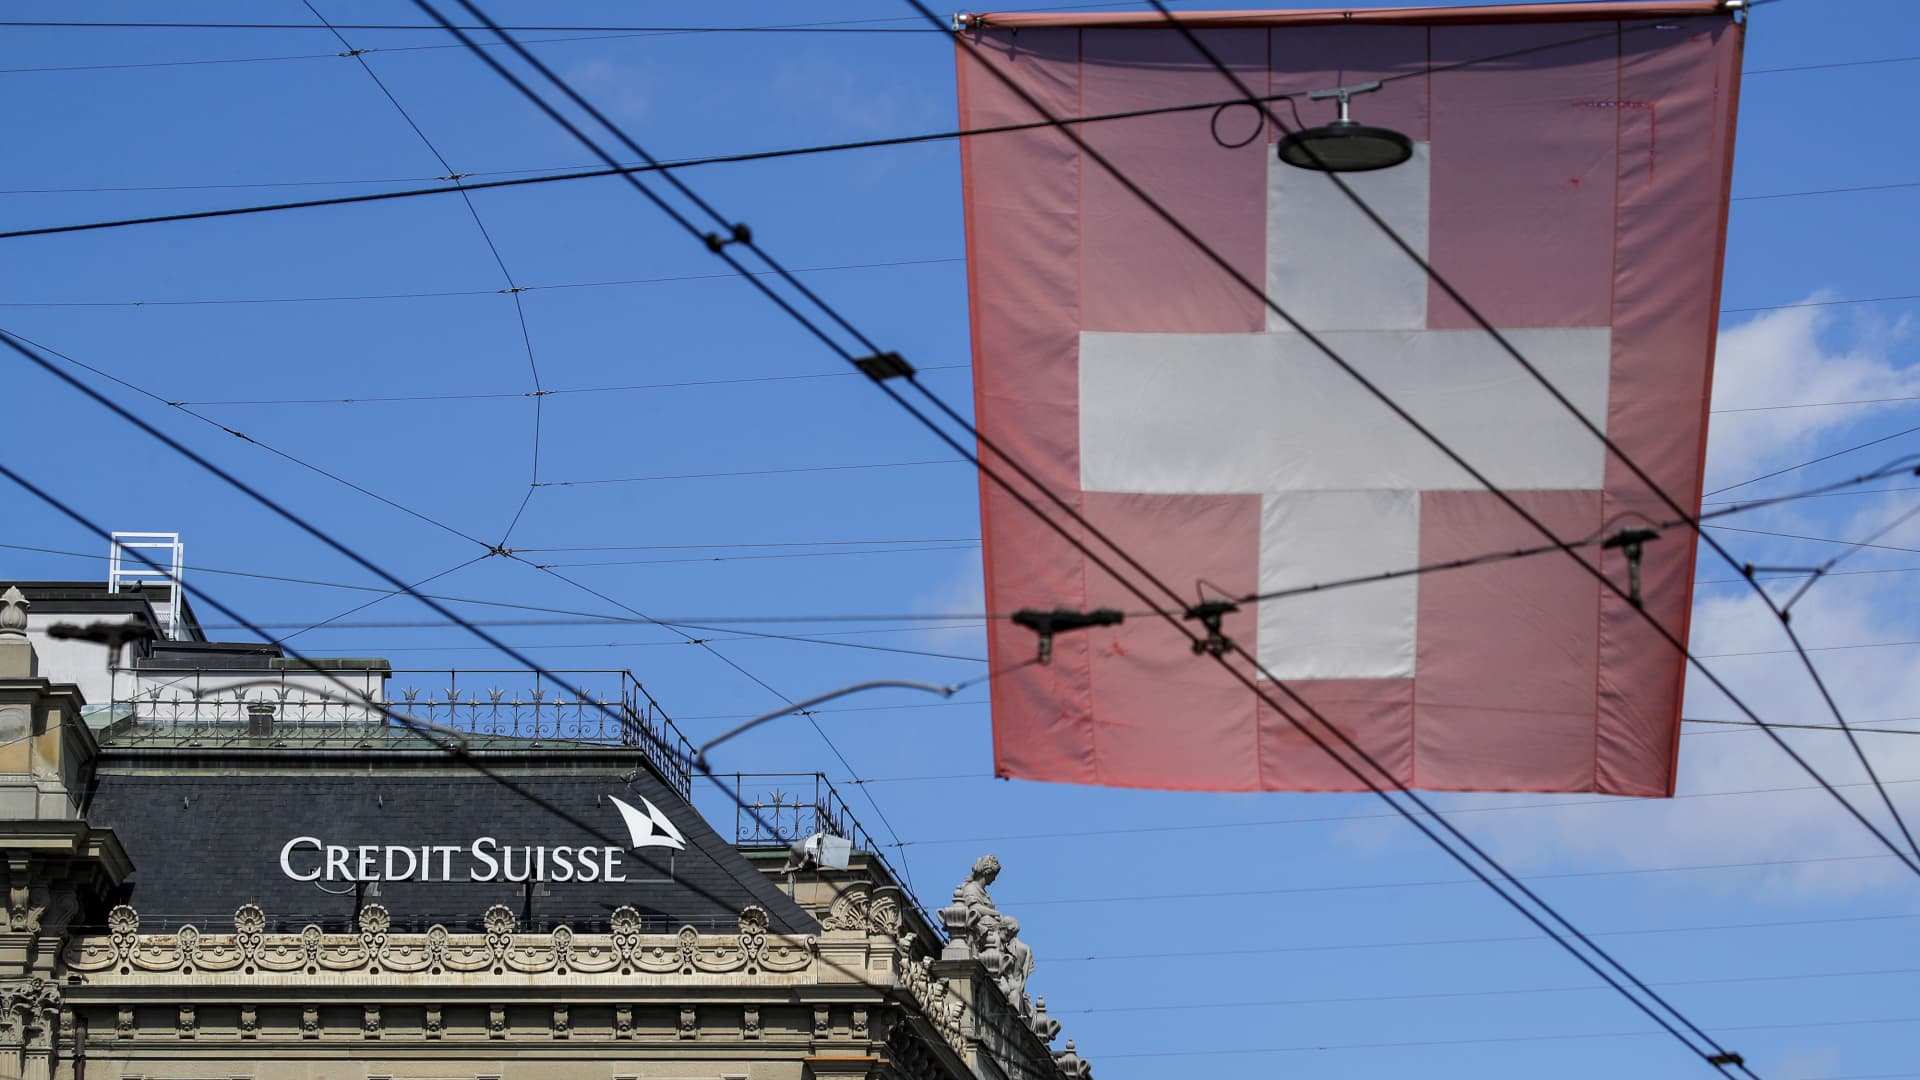 ‘The weakest links are cracking’: Investors consider possible Credit Suisse contagion